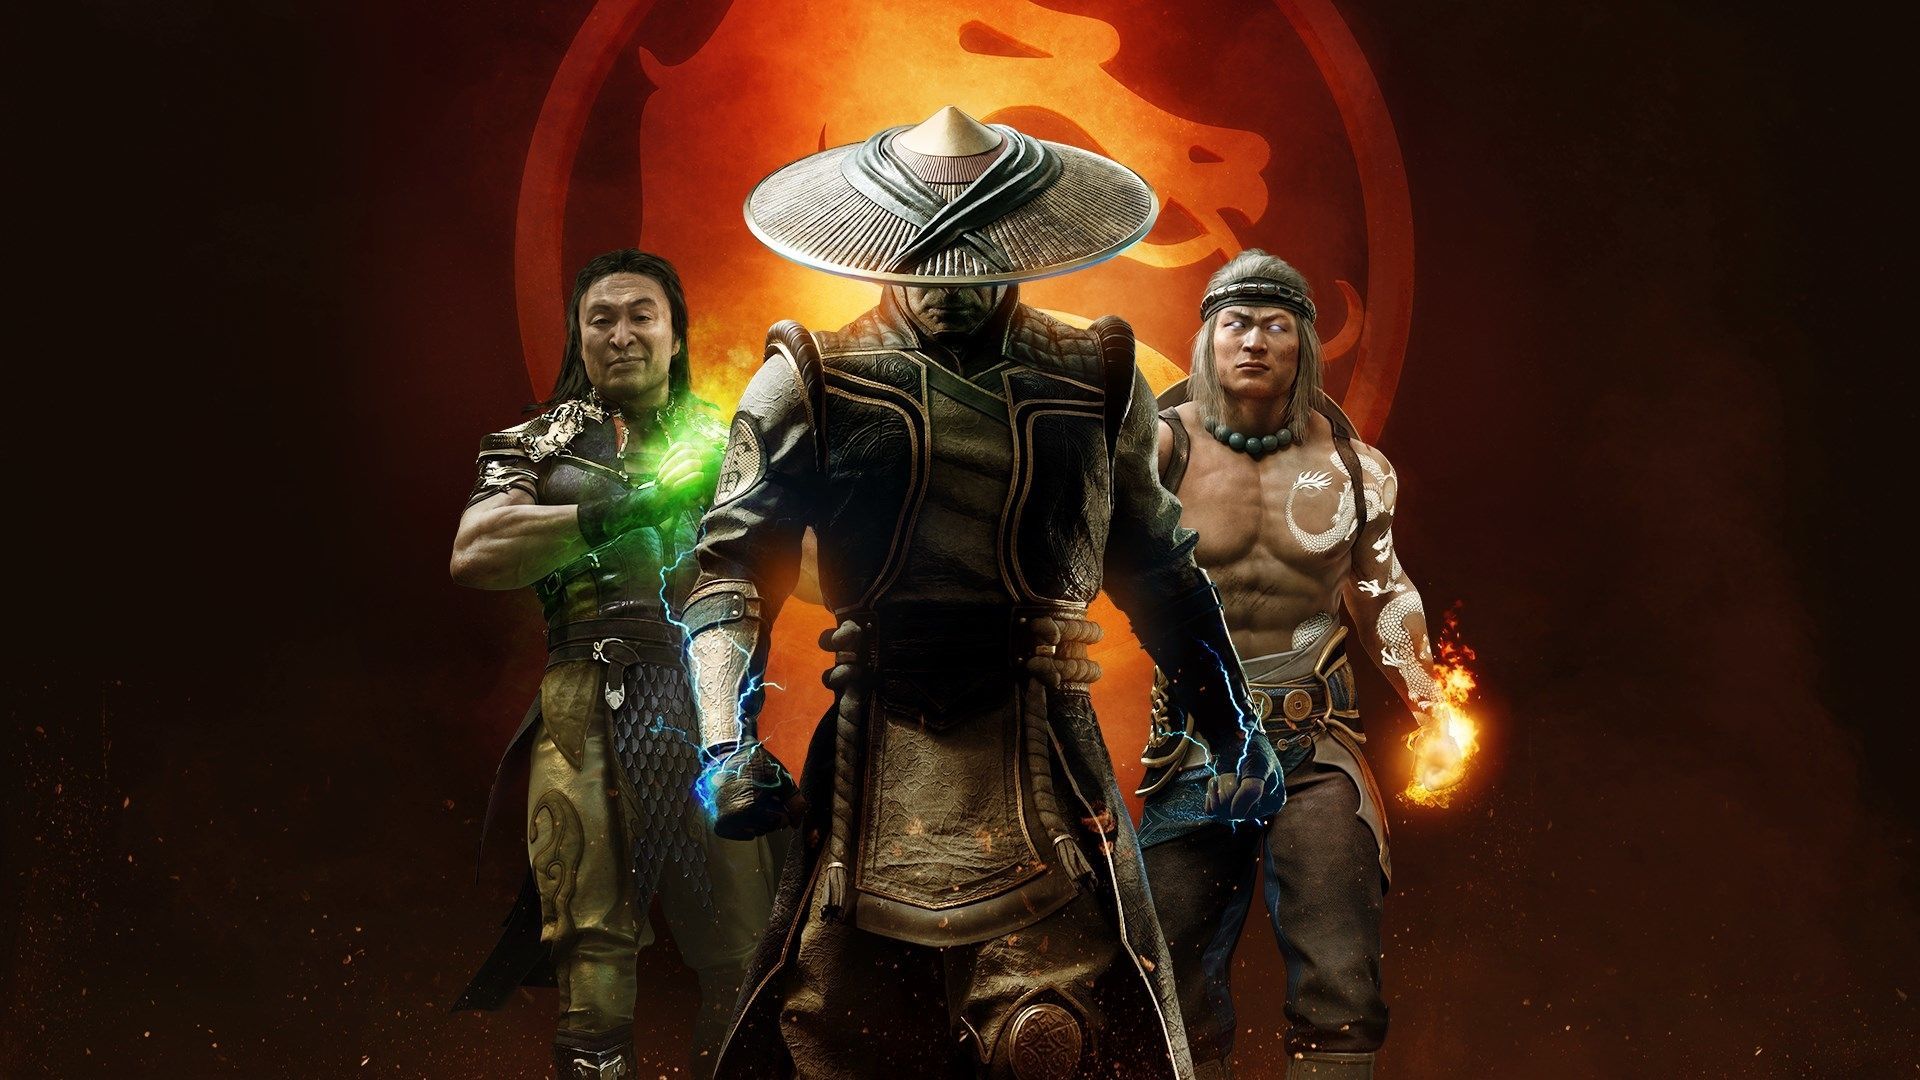 The New Mortal Kombat Movie in 2021: 5 Characters We Want to See